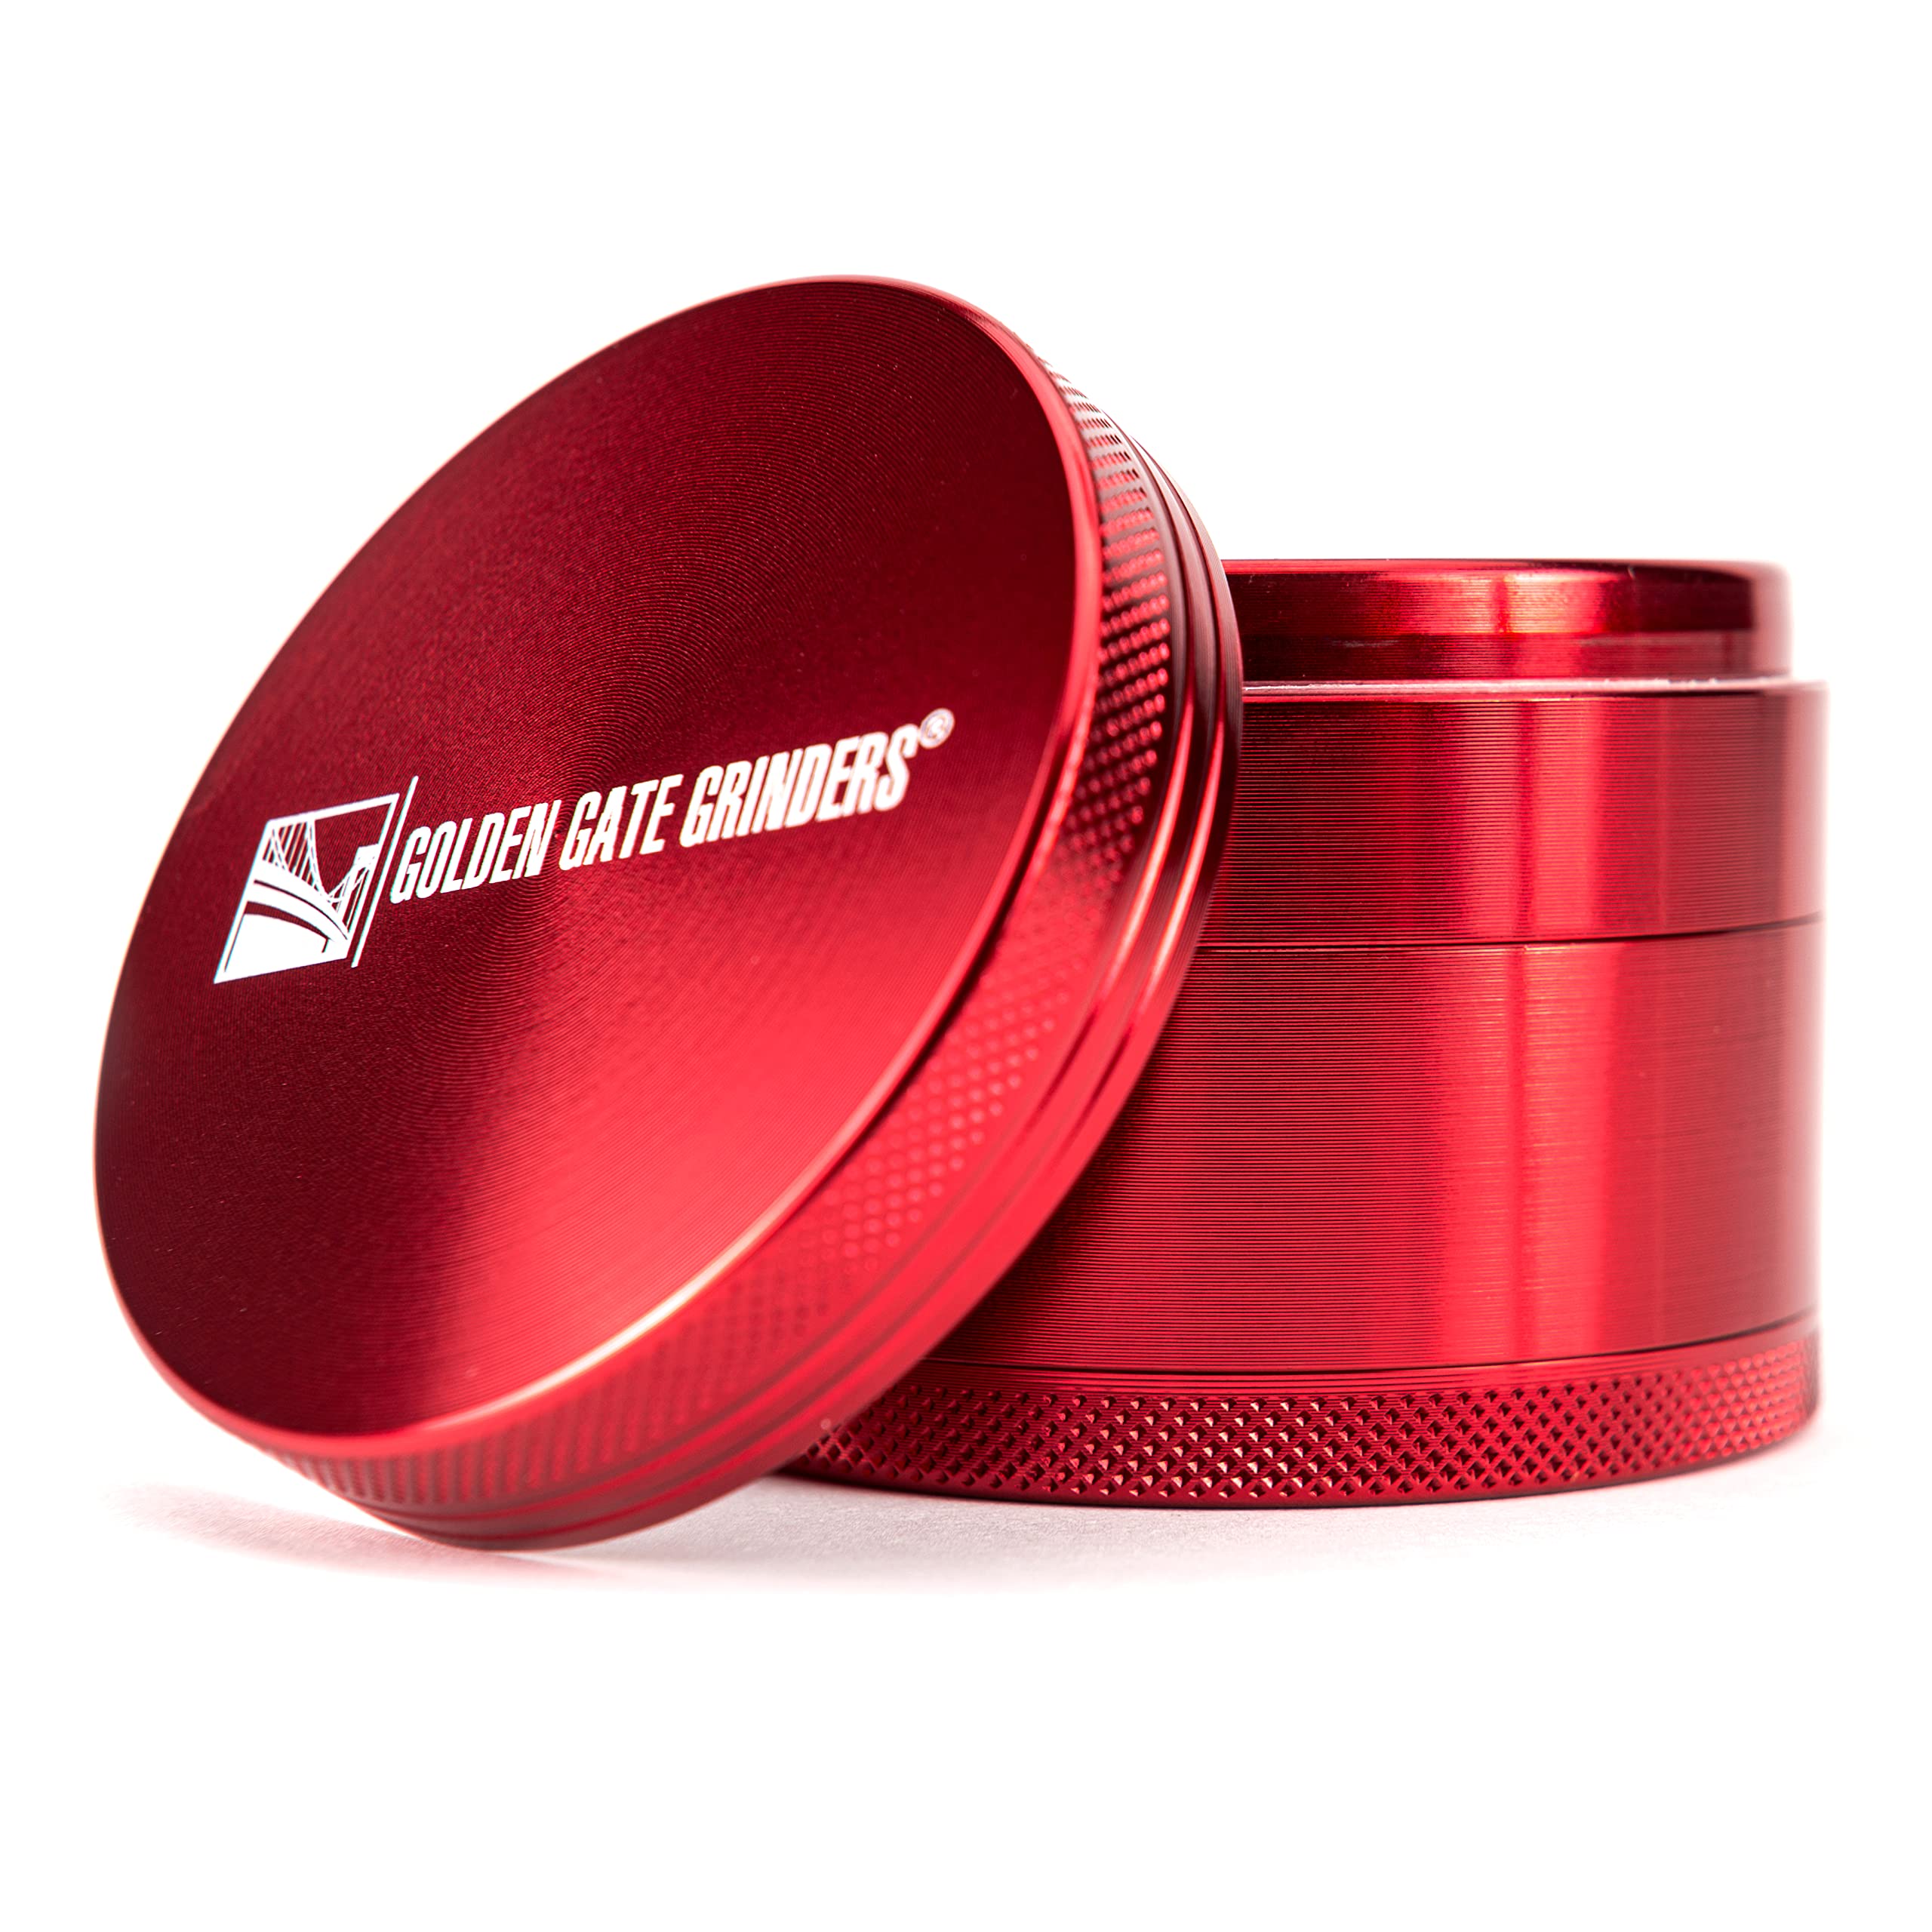 Golden Gate Grinders 2.5" Smoke Crusher Aluminum Tobacco Spice Grinder - Red - the GGG